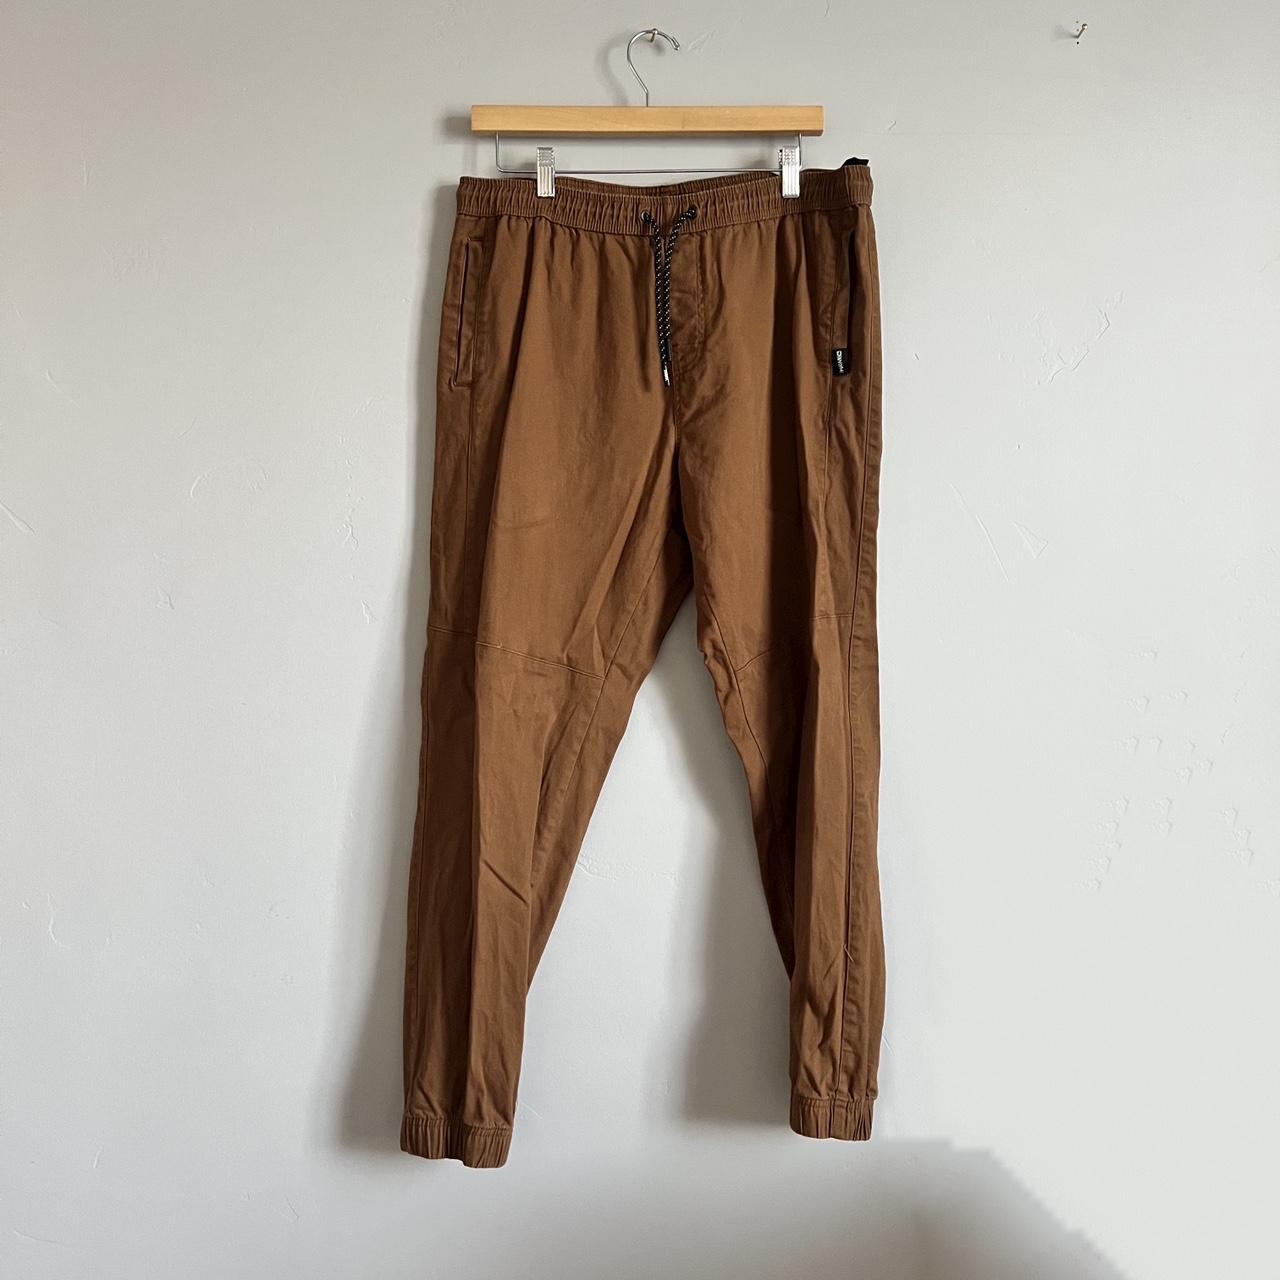 Hawke & Co. Men's Brown and Khaki Trousers